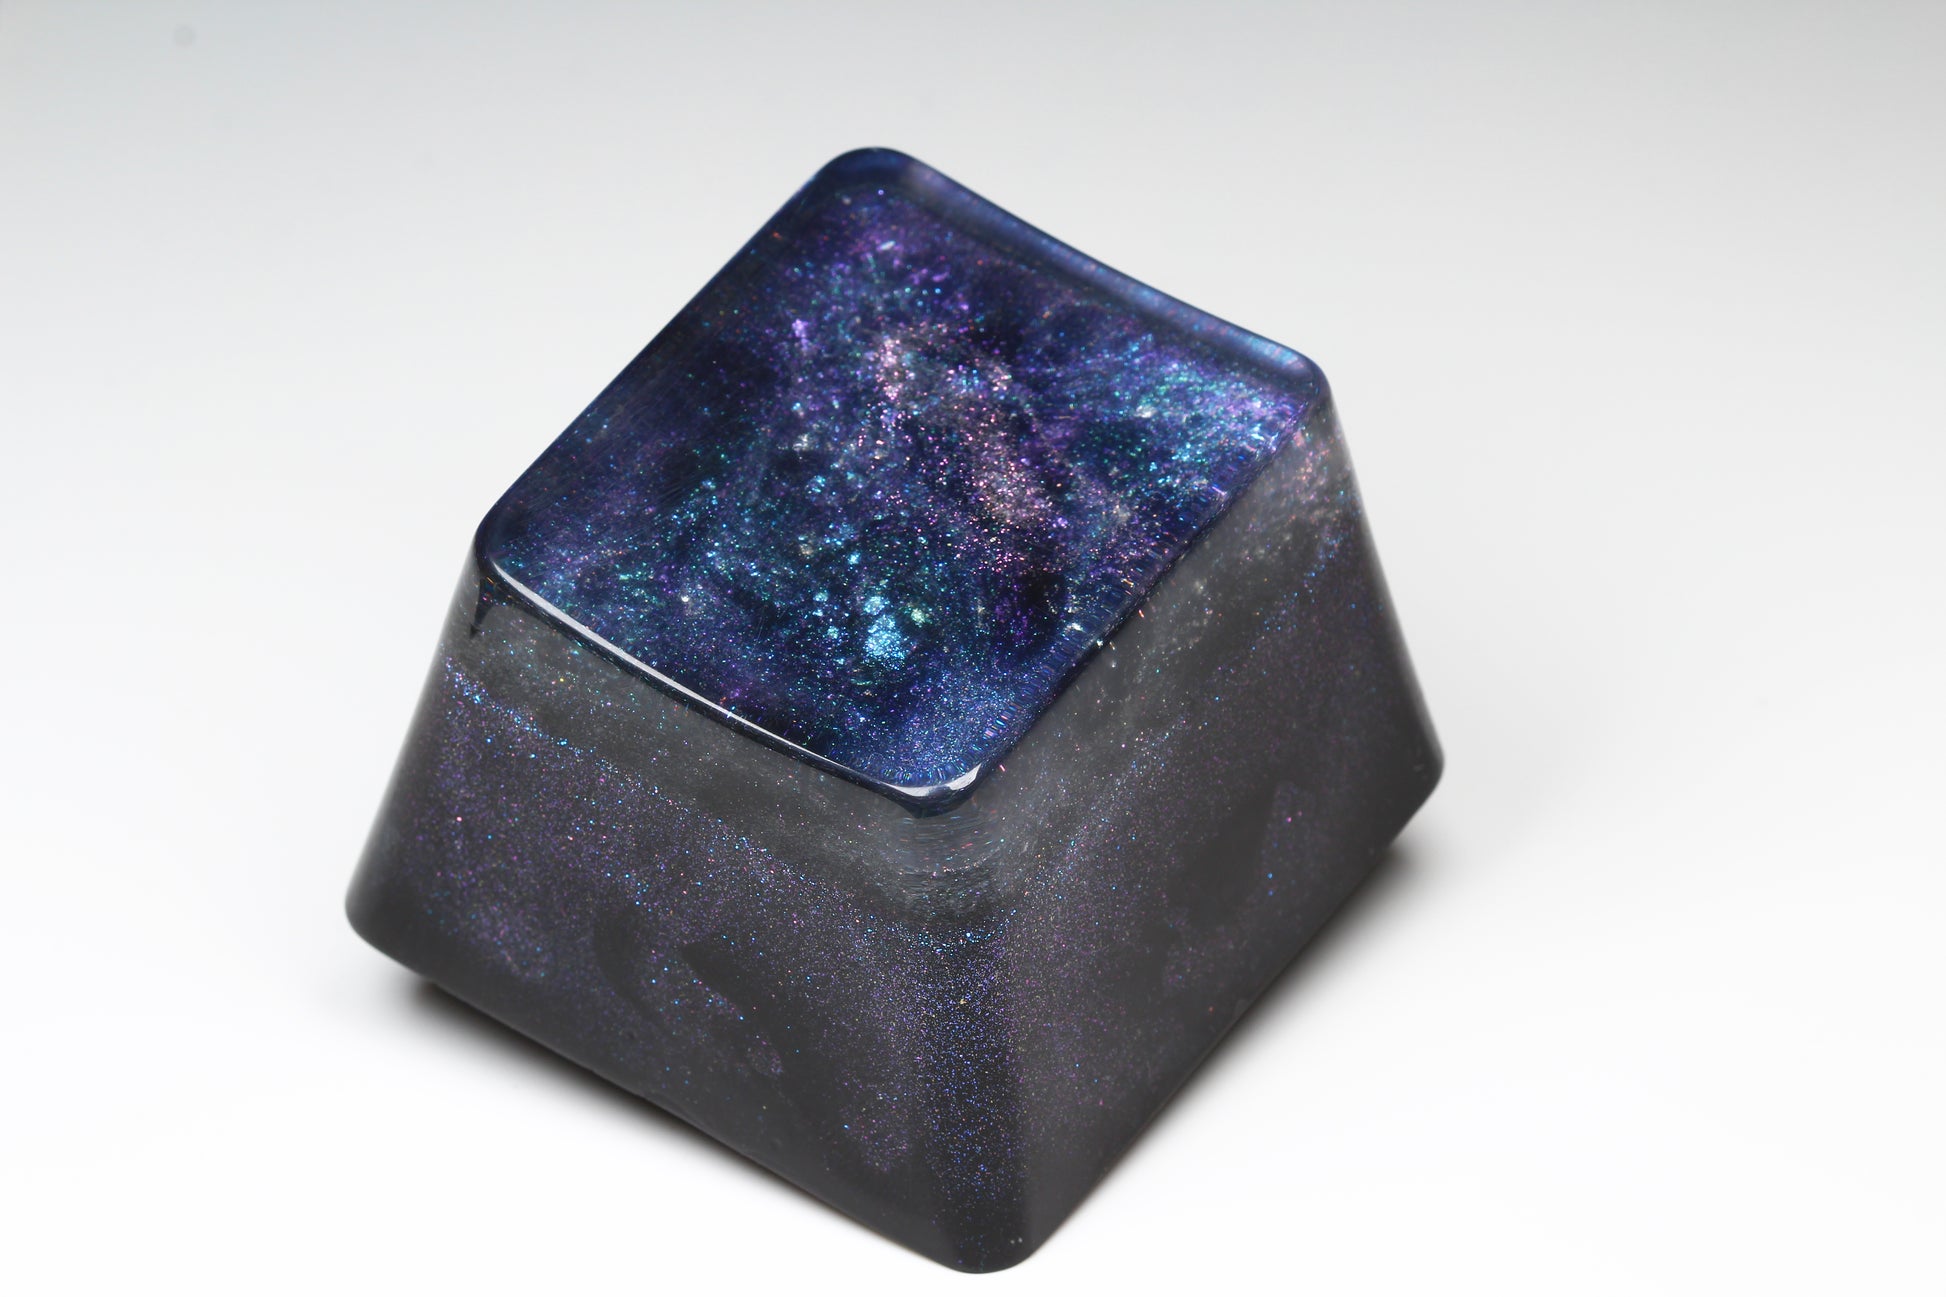 Gimpy Gigantikey - Deep Field - PrimeCaps Keycap - Blank and Sculpted Artisan Keycaps for cherry MX mechanical keyboards 